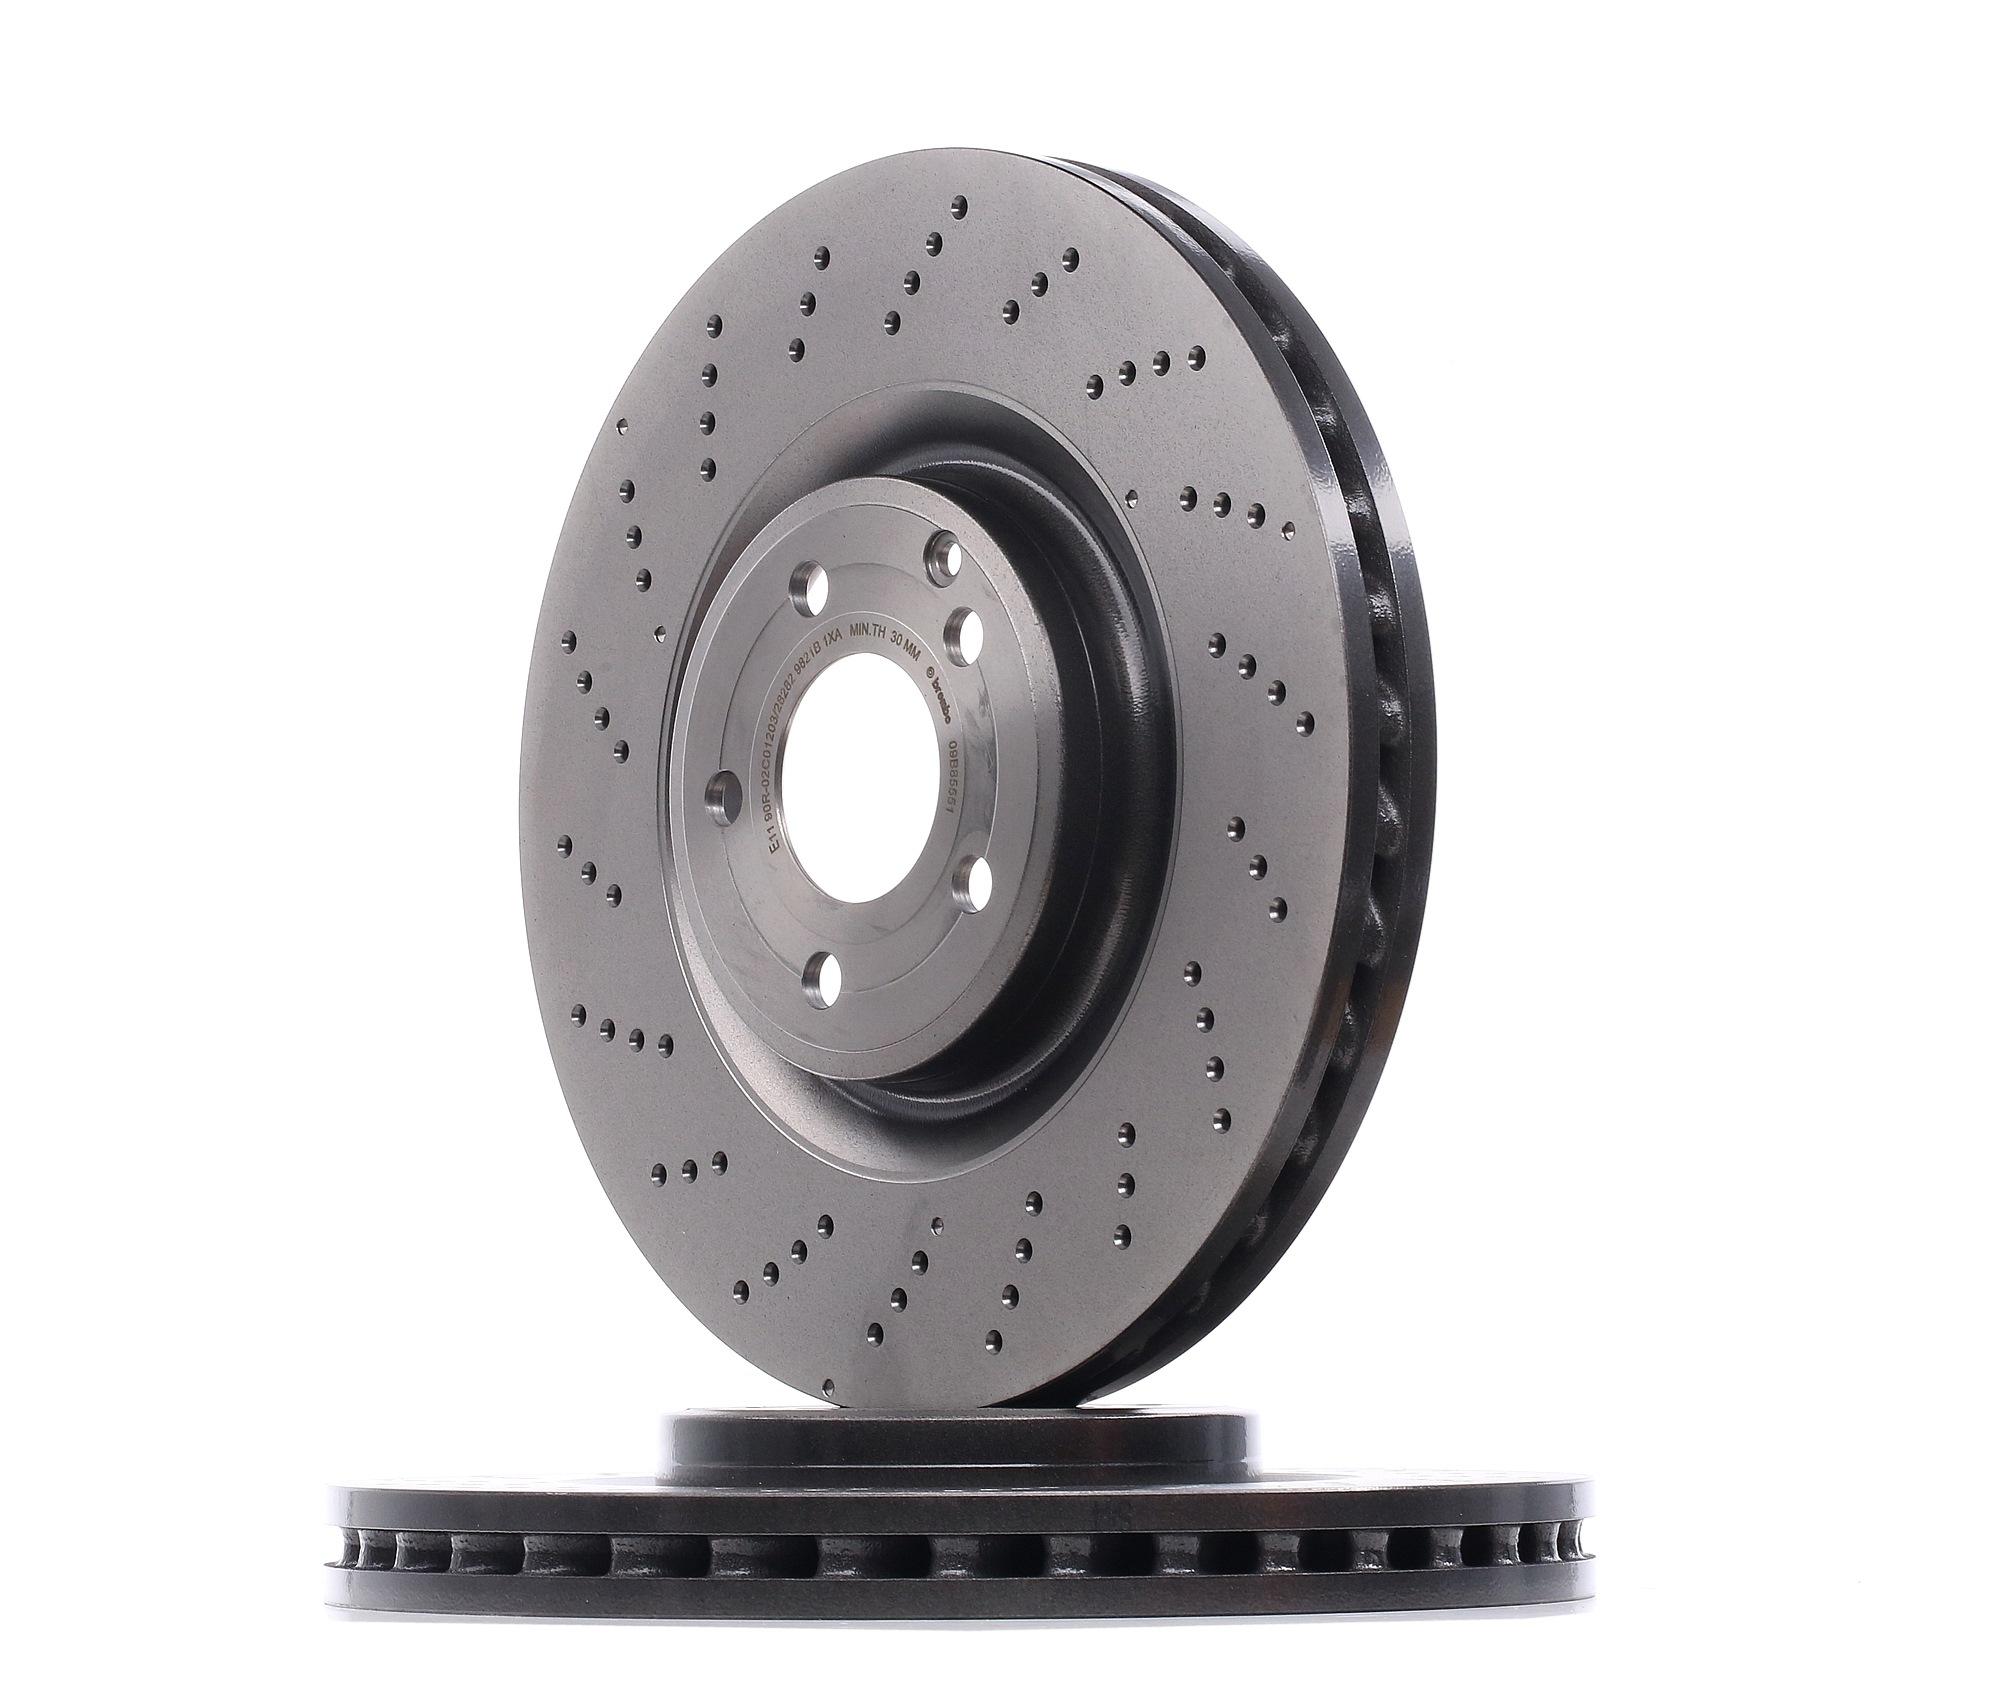 BREMBO COATED DISC LINE 09.B855.51 Brake disc 344x32mm, 5, perforated/vented, Coated, High-carbon